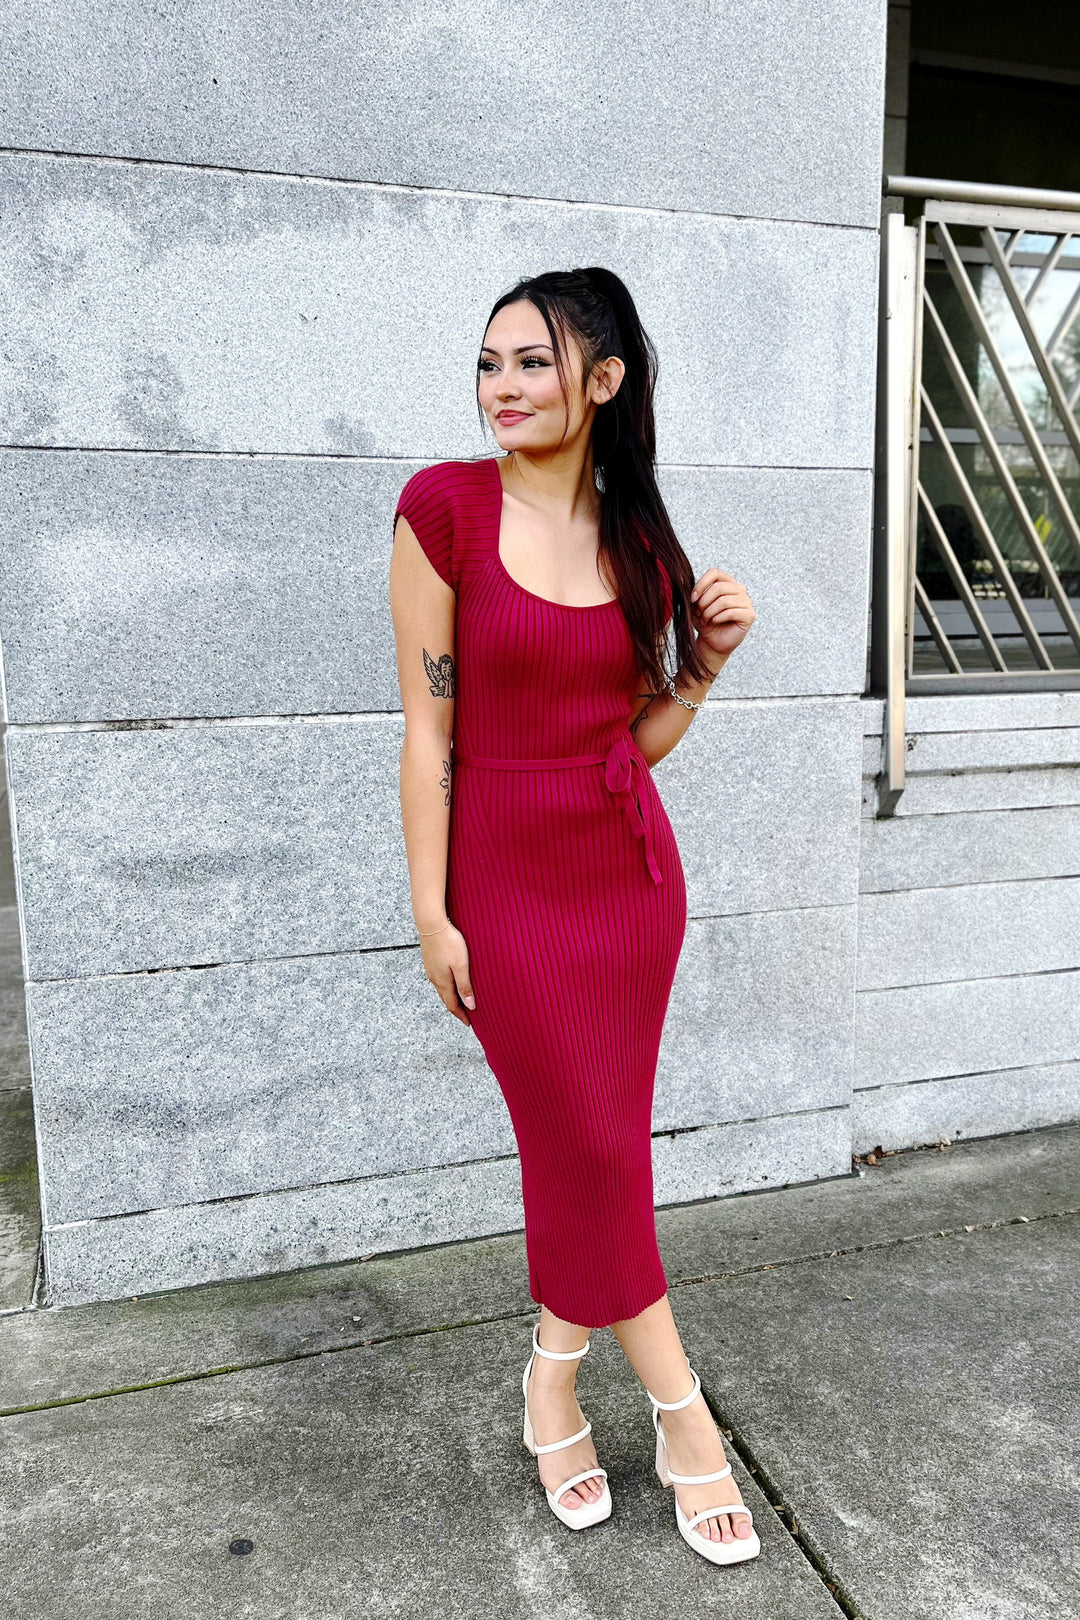 The Champagne Wishes Red Ribbed Midi Dress